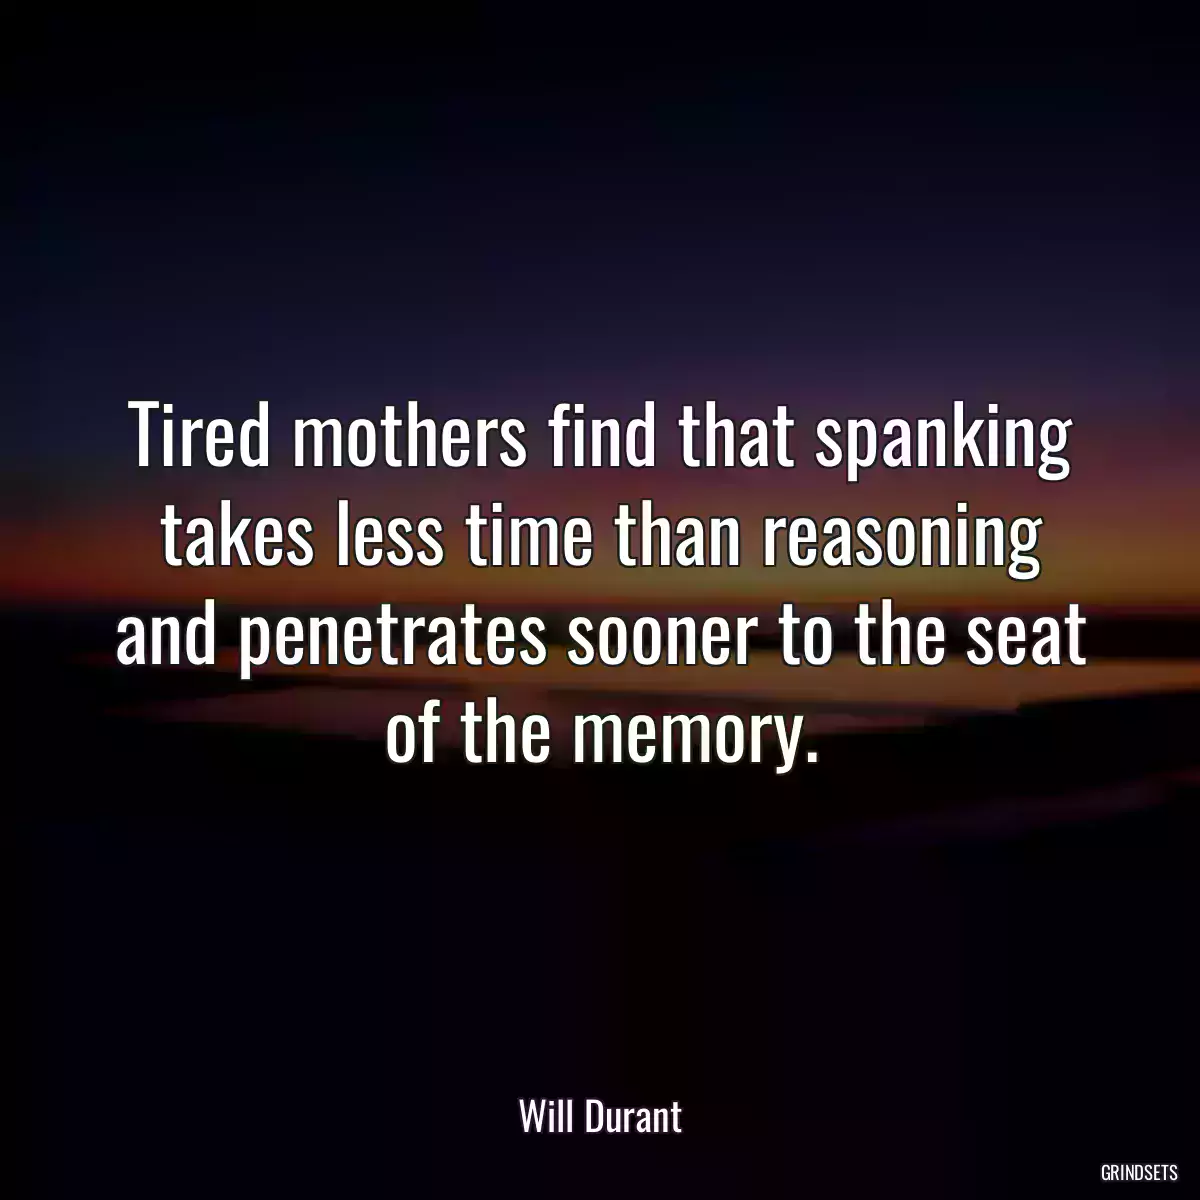 Tired mothers find that spanking takes less time than reasoning and penetrates sooner to the seat of the memory.